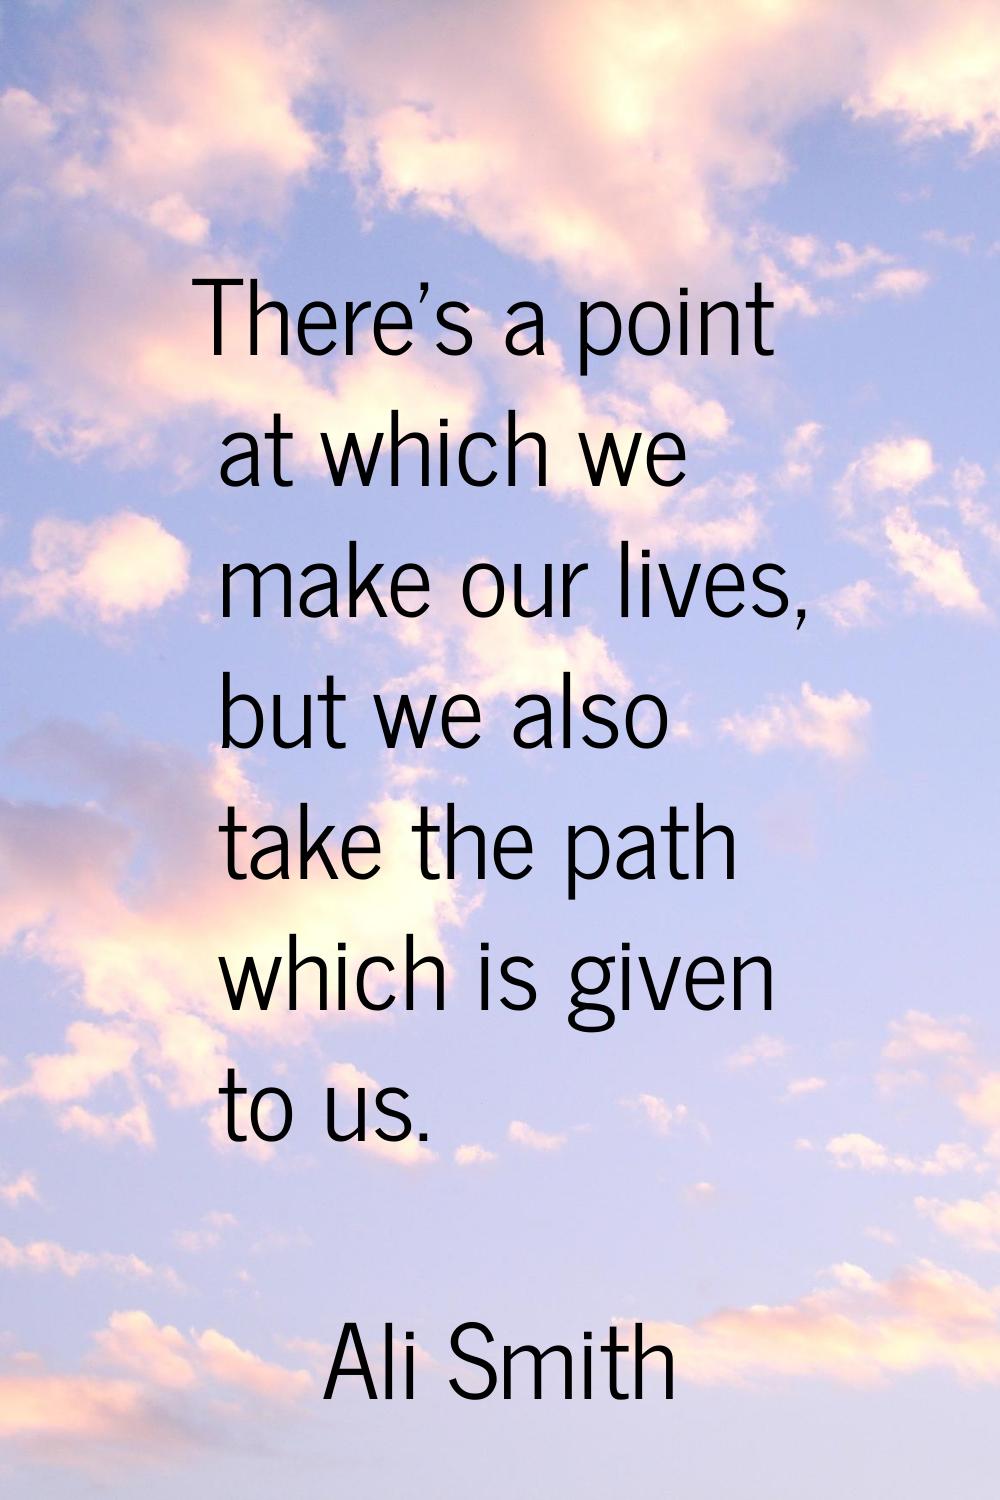 There's a point at which we make our lives, but we also take the path which is given to us.